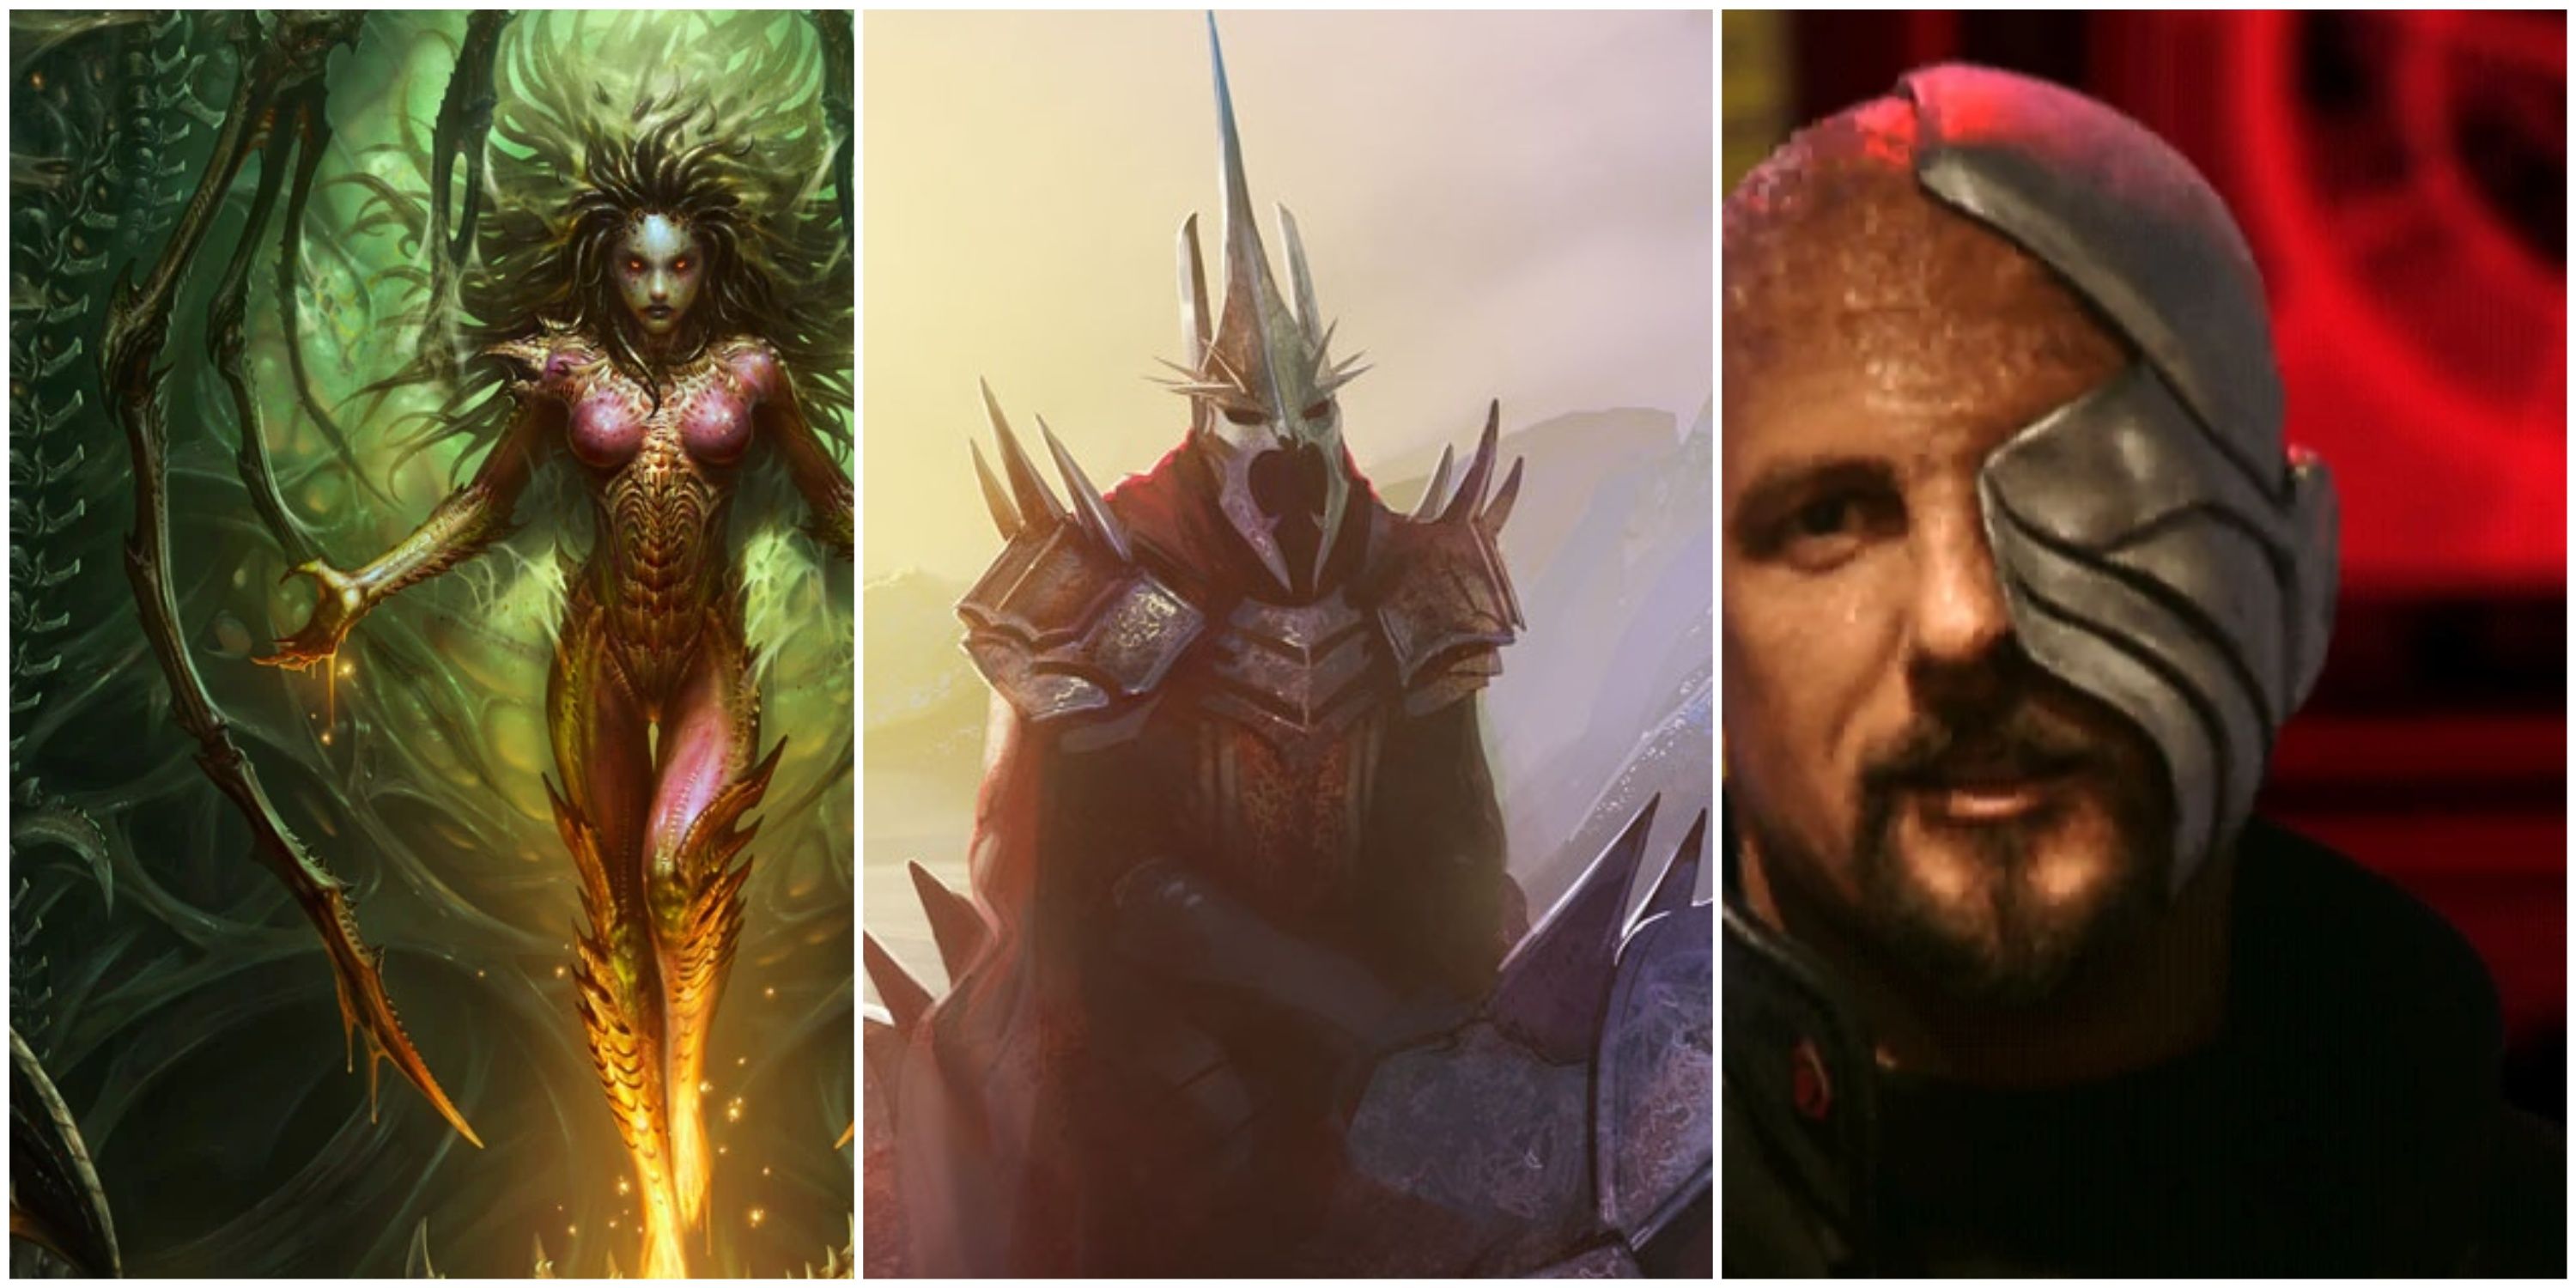 The Witch-King from the lord of the rings, Sarah Kerrigan from starcraft, Kane from Command & Conquer